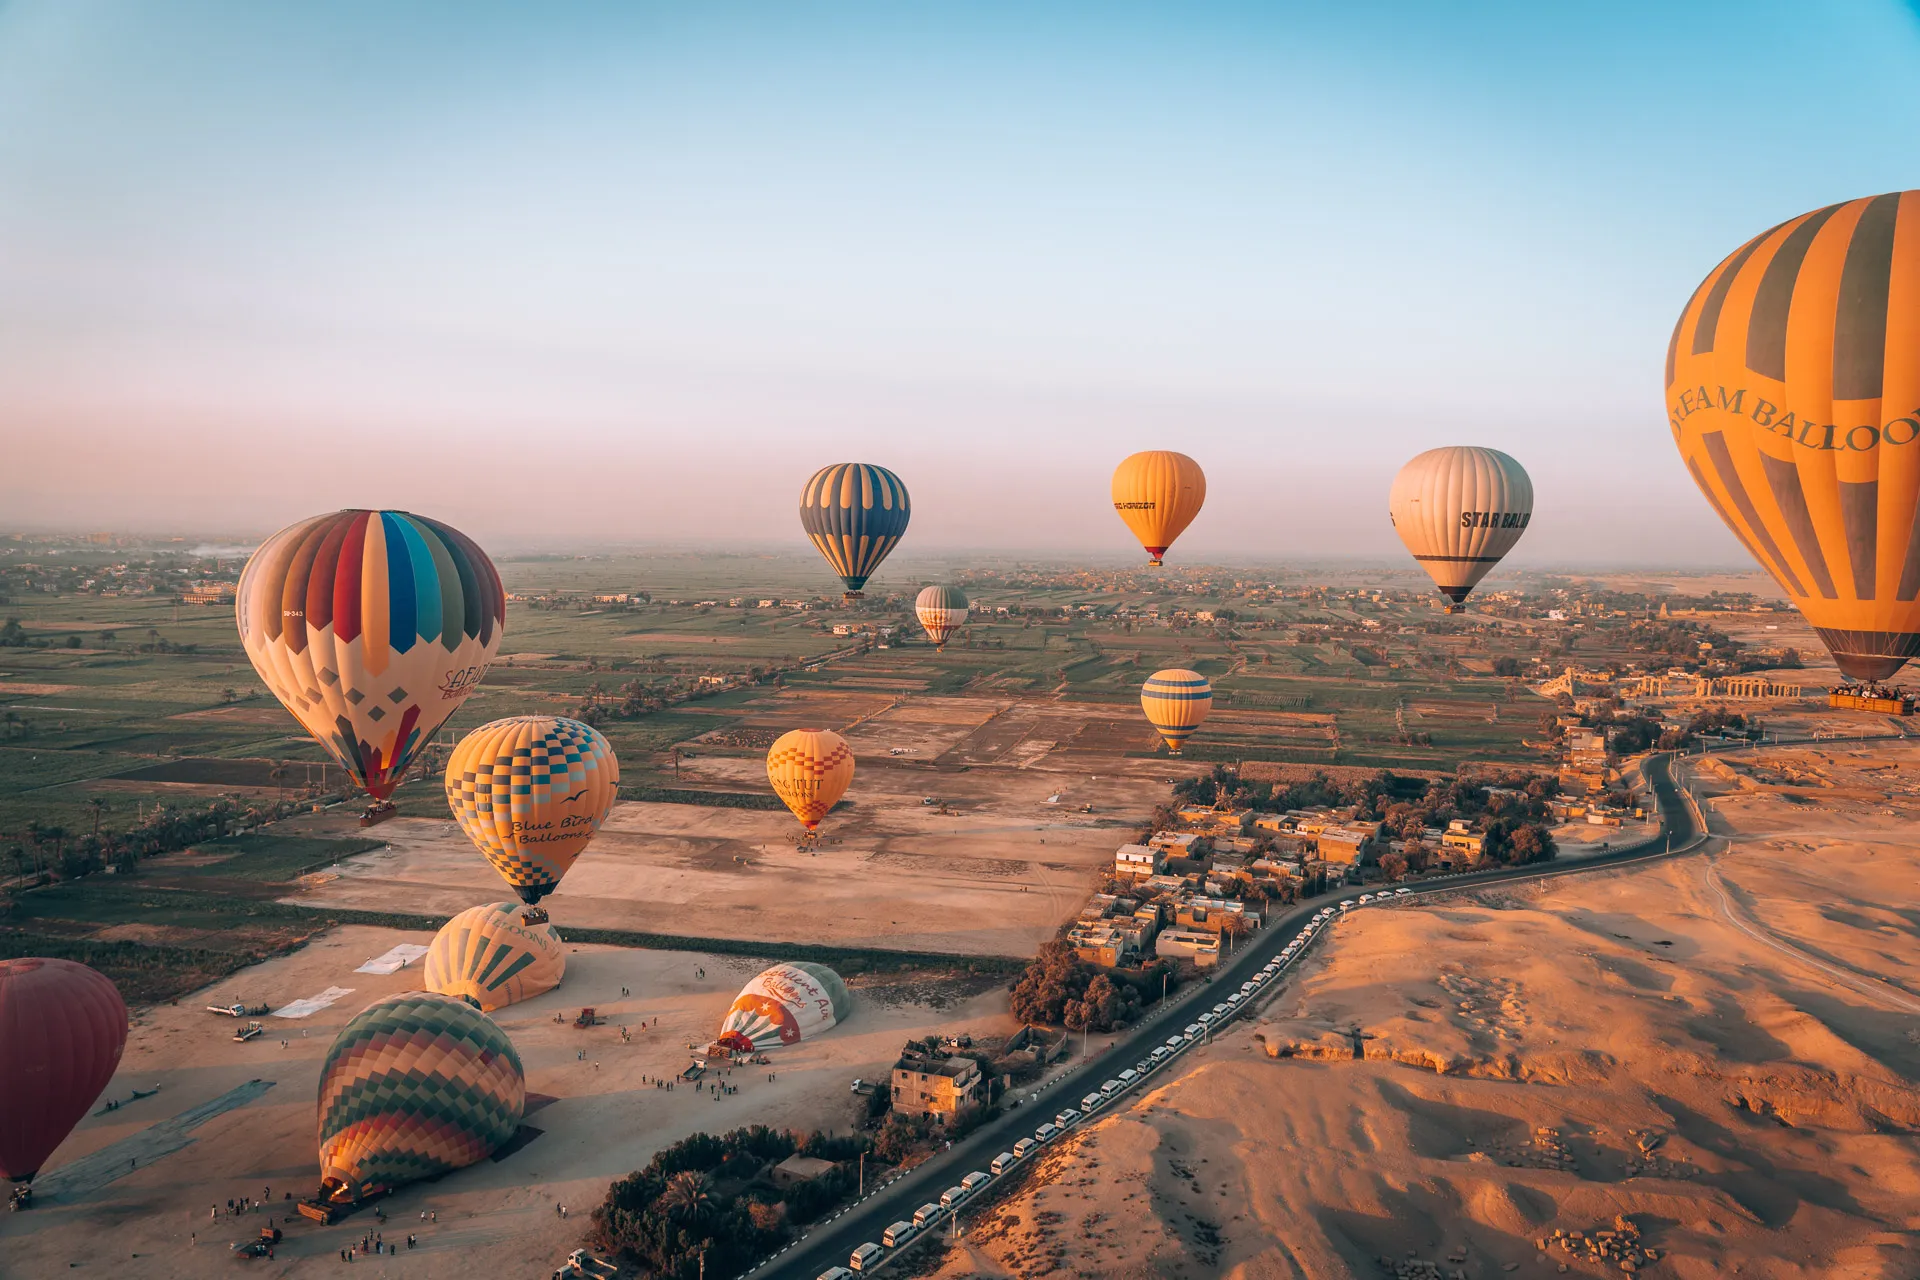 40 flying balloon flights were launched in the skies of Luxor today